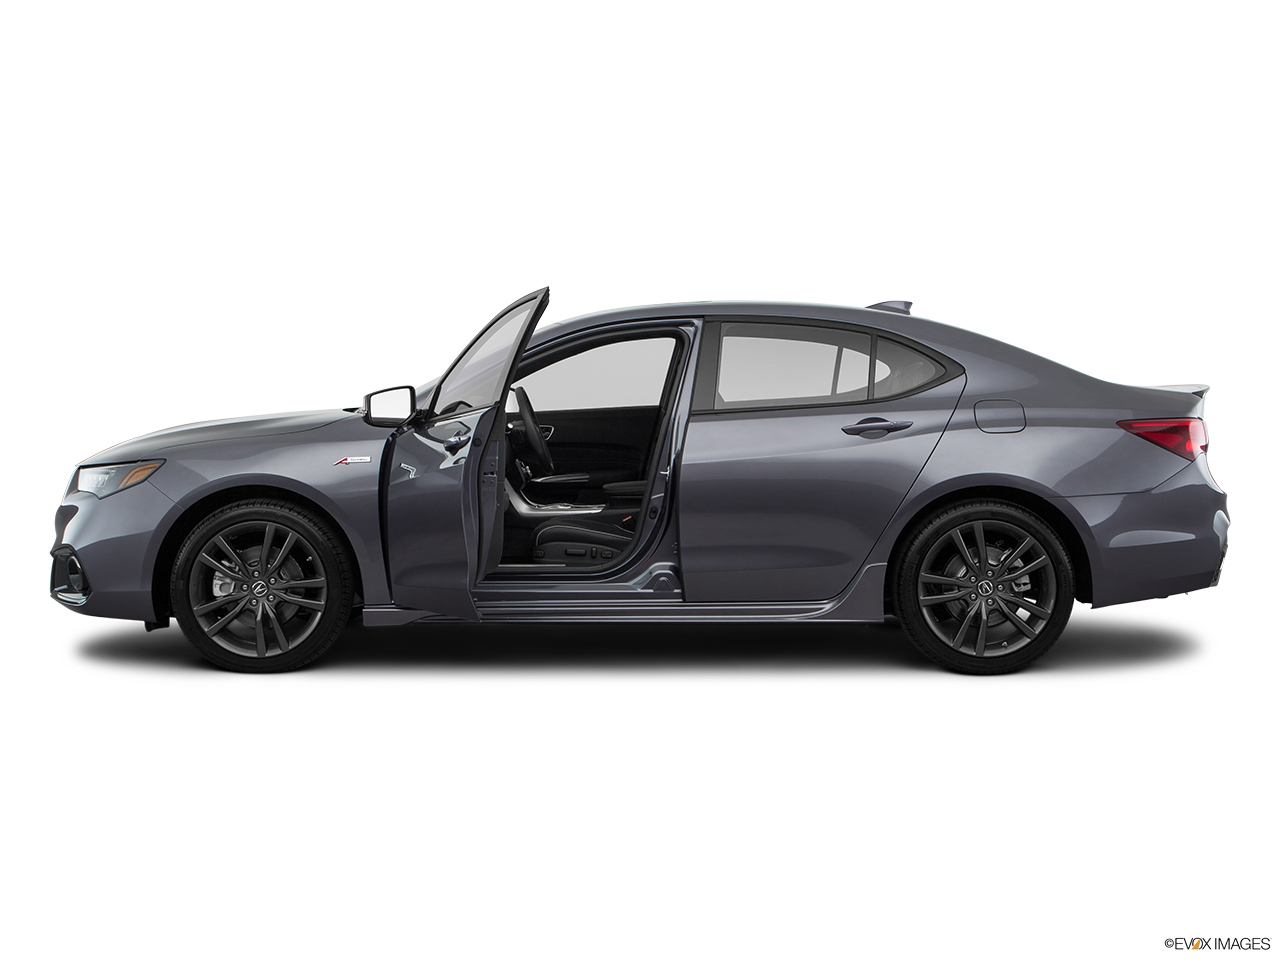 2020 Acura TLX 3.5L Driver's side profile with drivers side door open. 